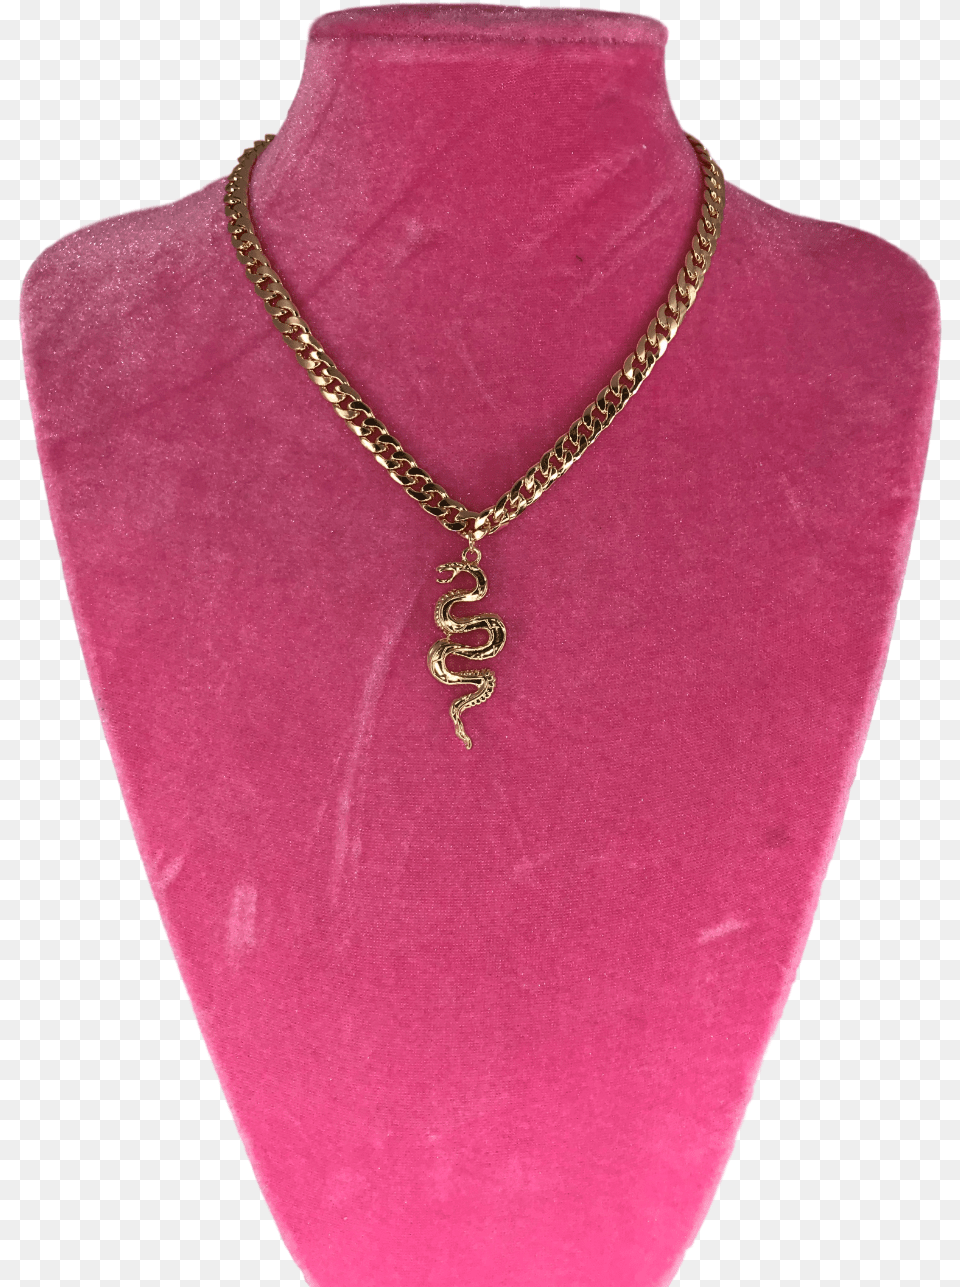 Gold Snake Chain Necklace Pendant, Accessories, Jewelry Png